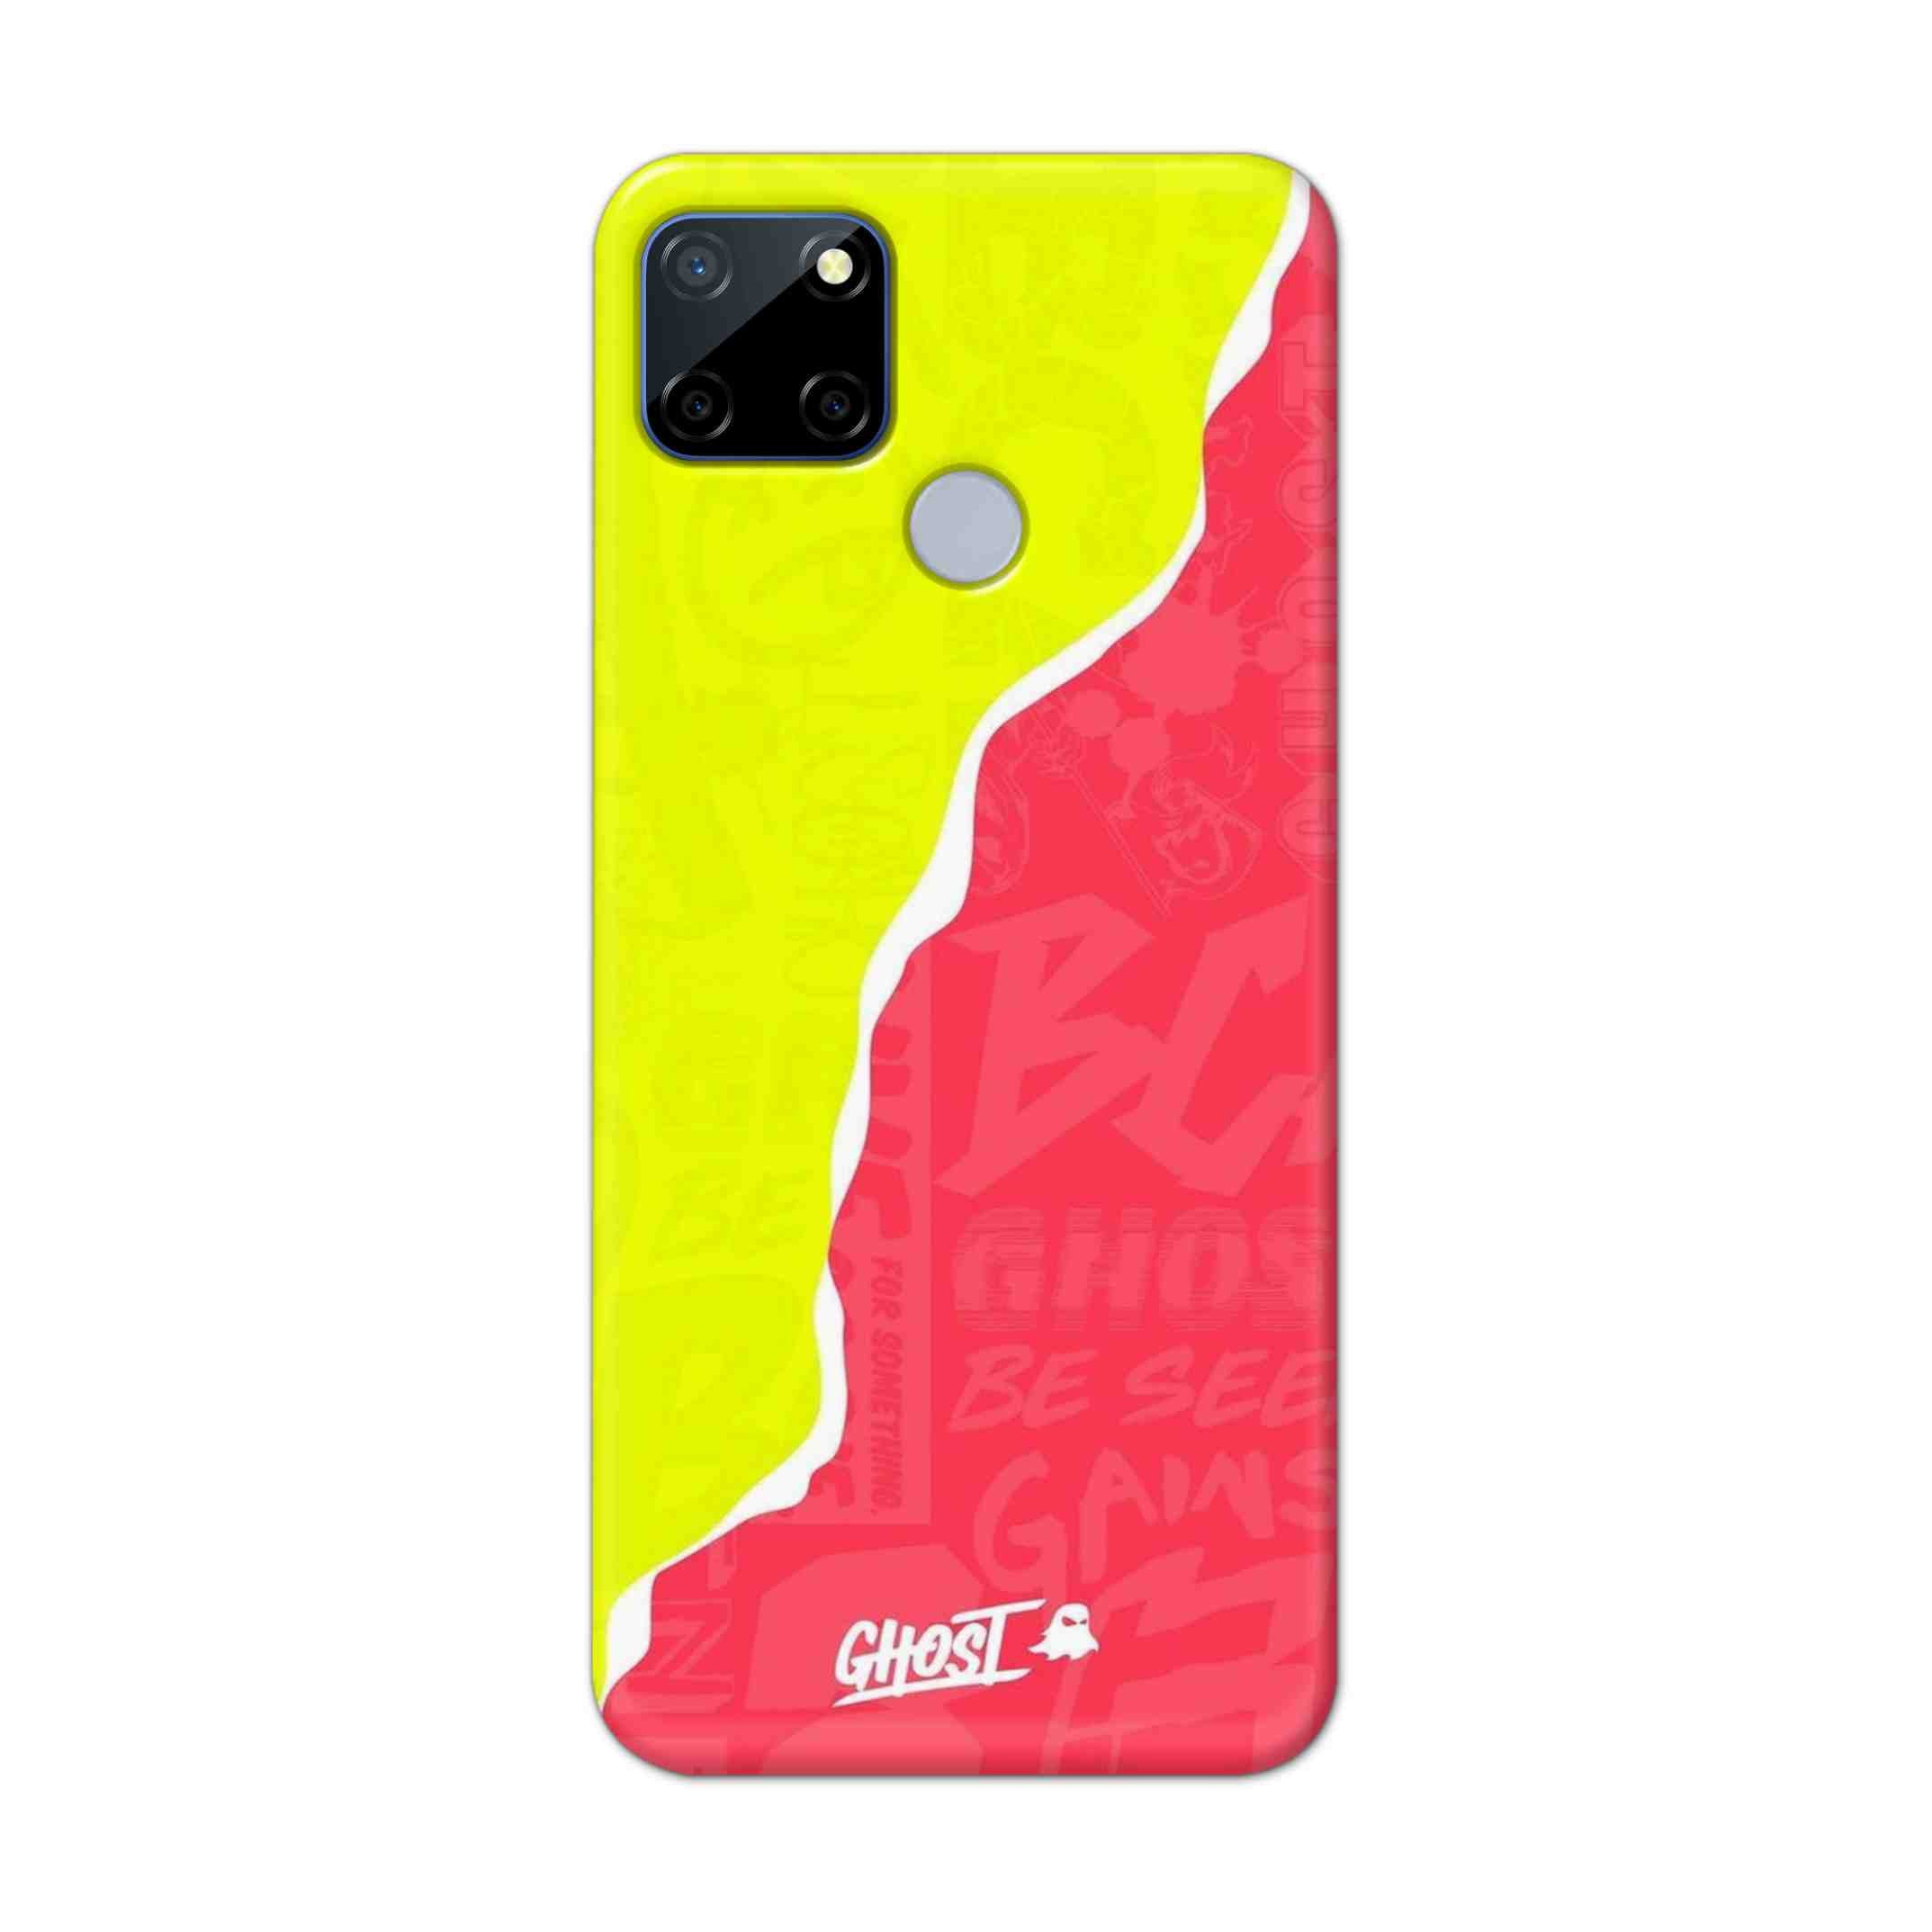 Buy Ghost Hard Back Mobile Phone Case Cover For Realme C12 Online